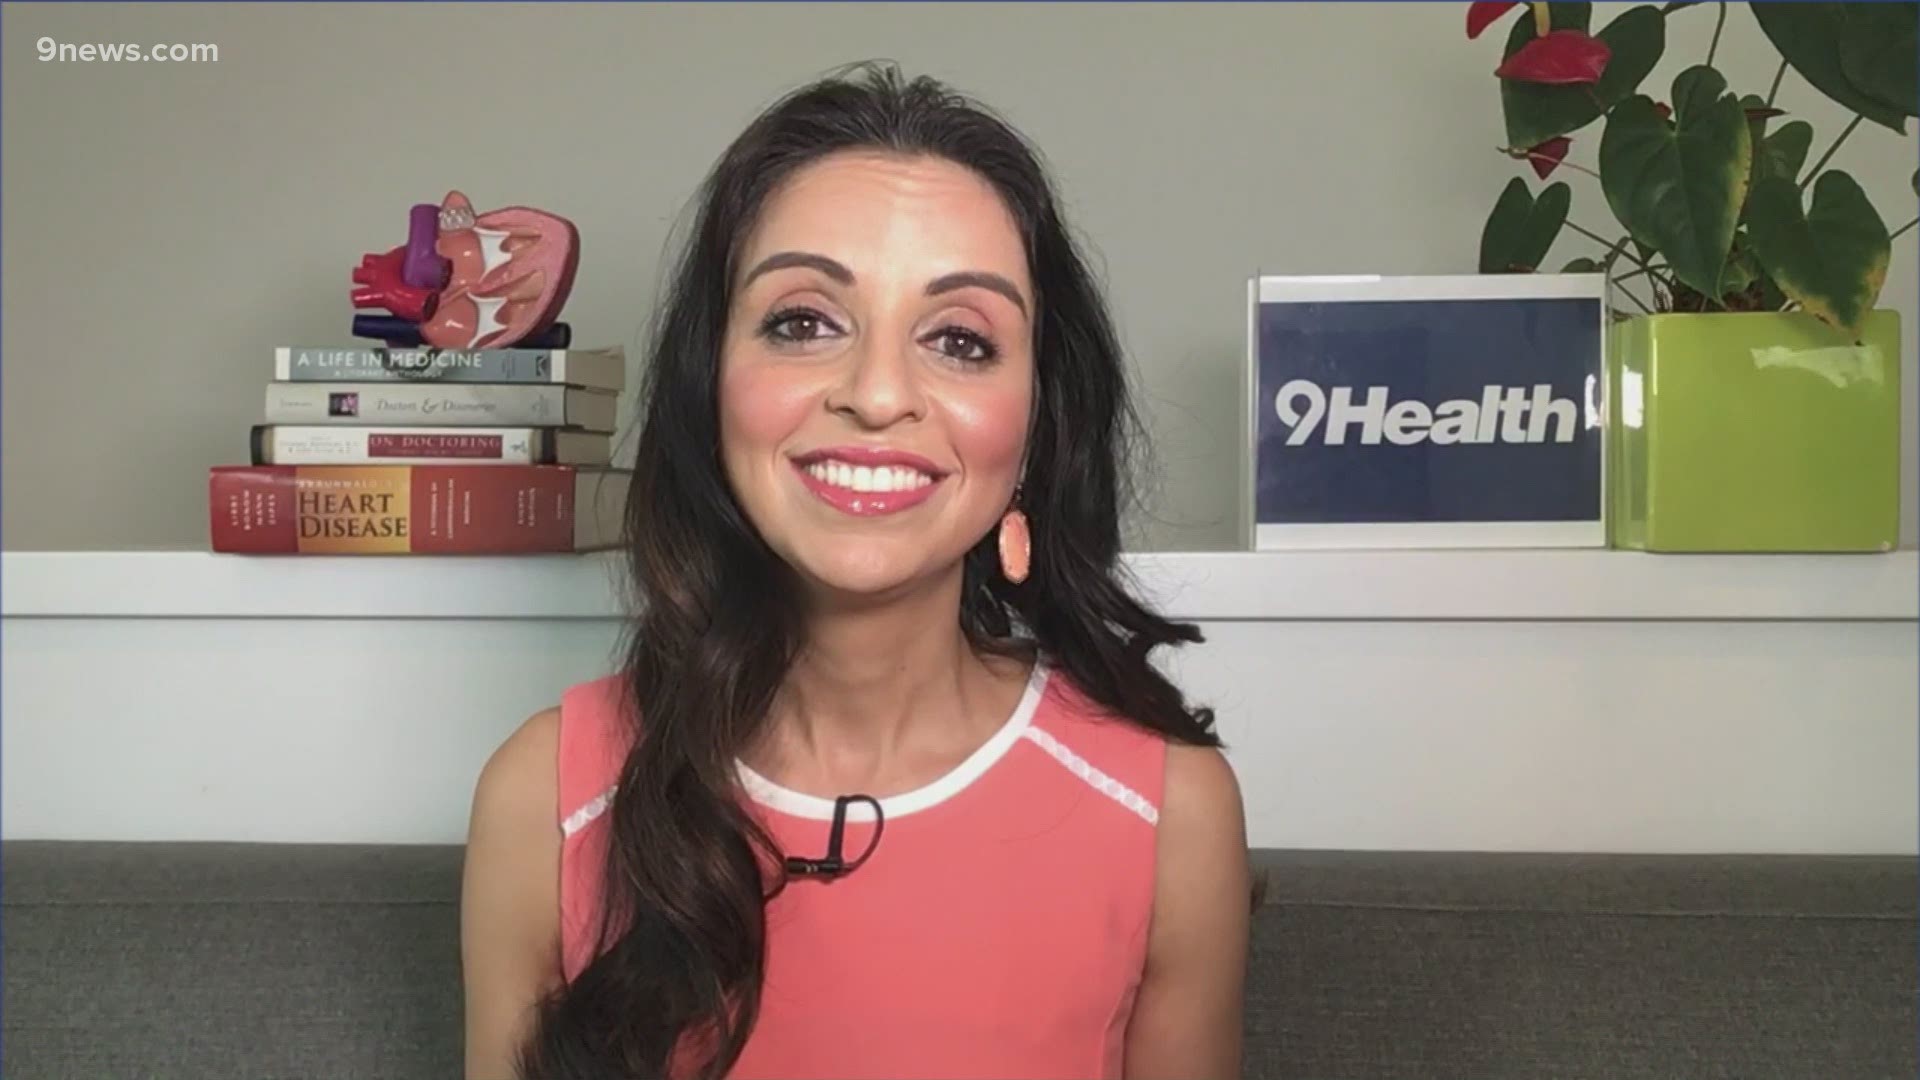 As more Coloradans get vaccinated, more questions about the vaccine come up. 9Health Expert Dr. Payal Kohli answered some of those questions.